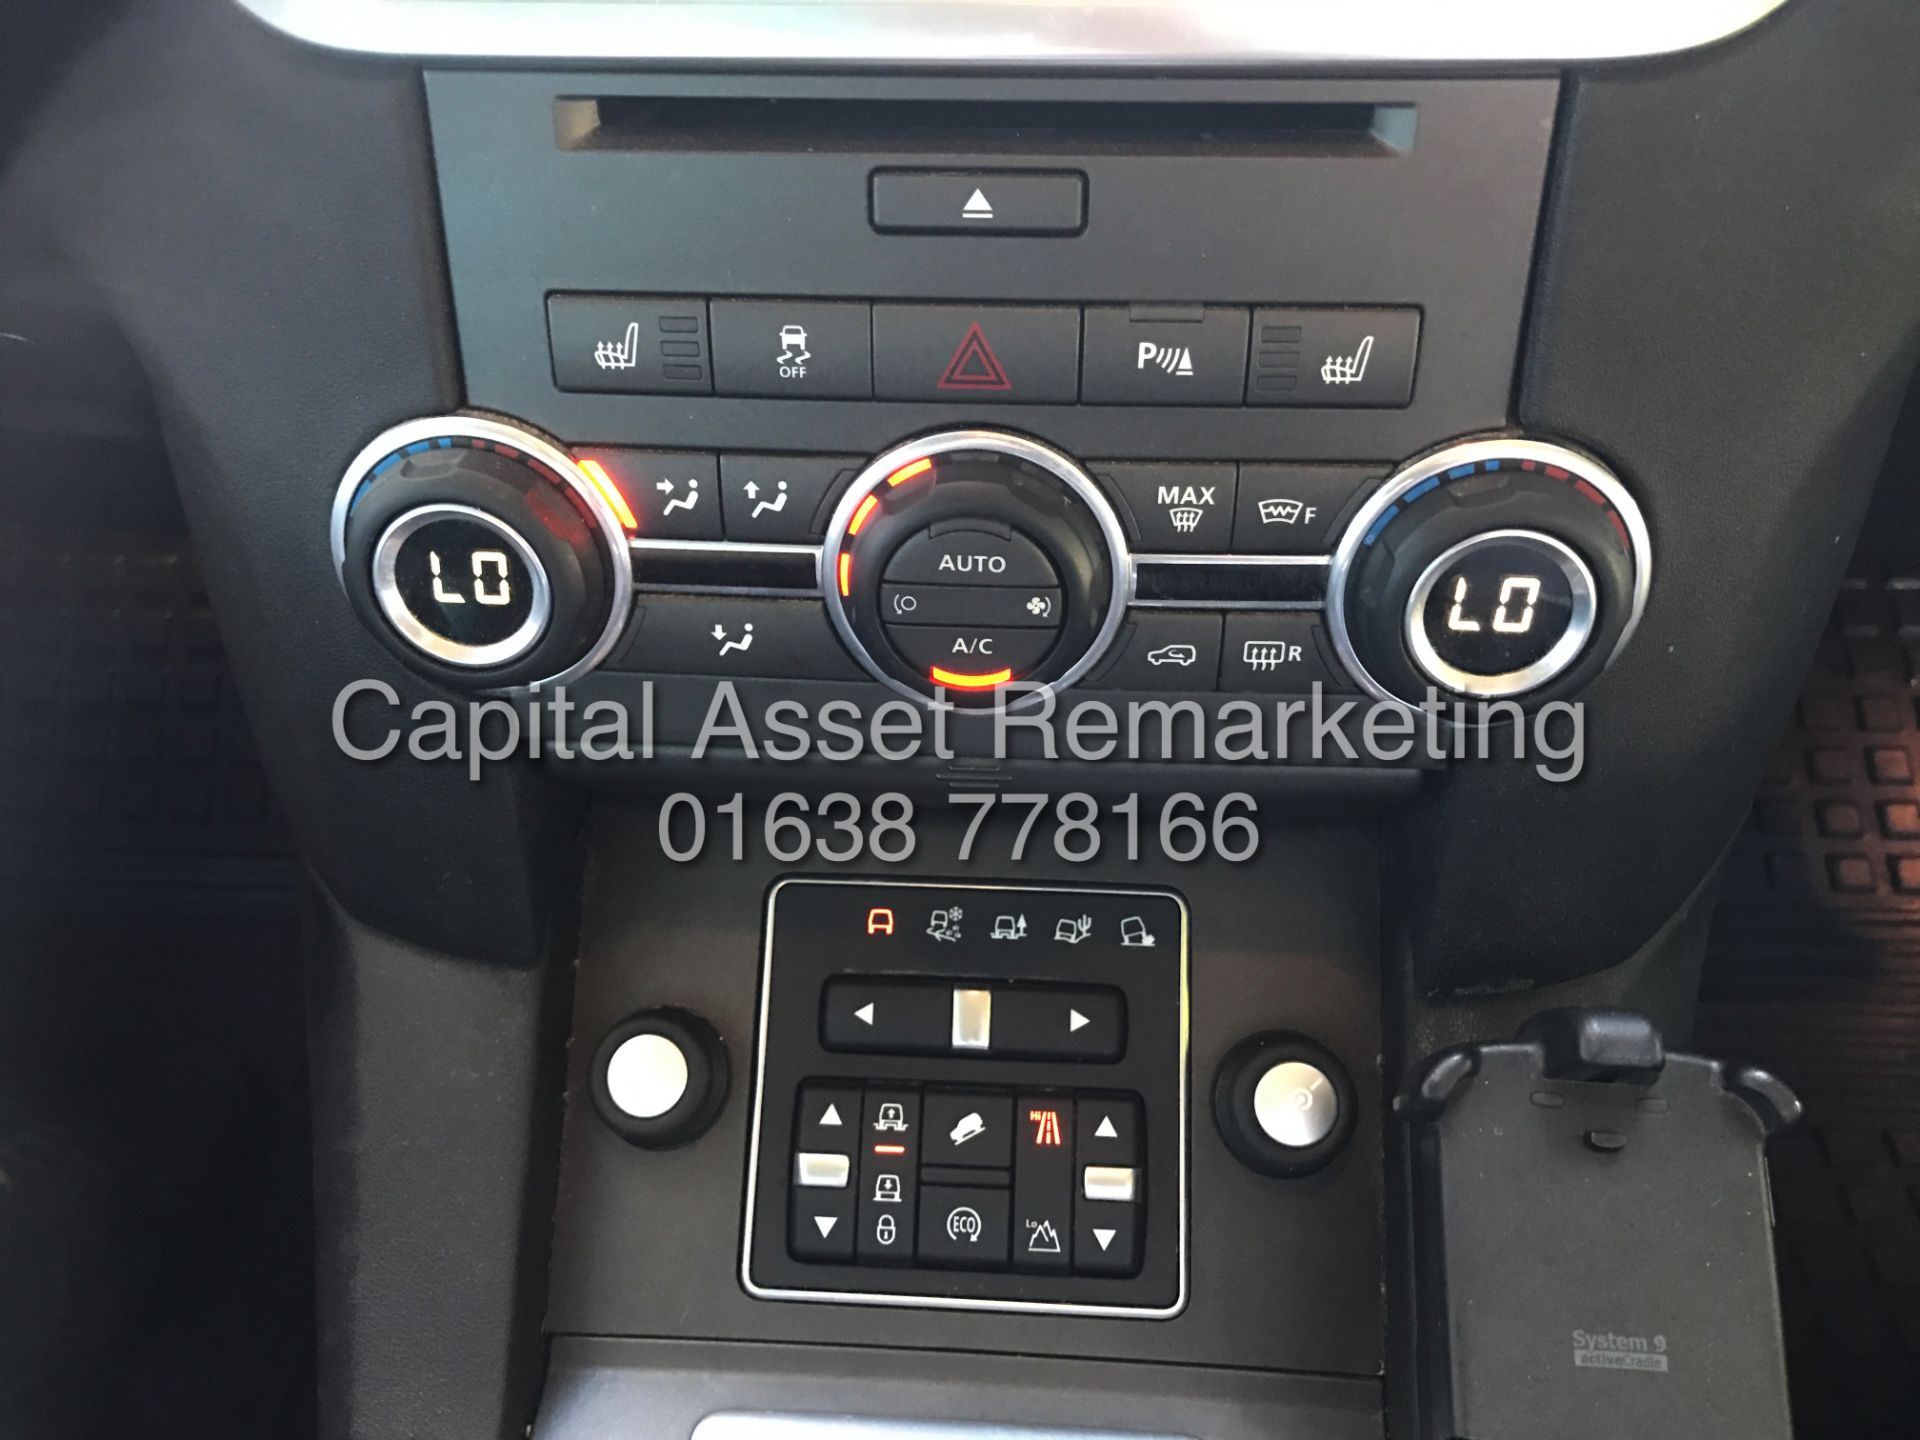 (On Sale) LAND ROVER DISCOVERY 4 'XS EDITION' *COMMERCIAL* (2015) '3.0 SDV6 - AUTO-LEATHER-SAT NAV' - Image 27 of 32